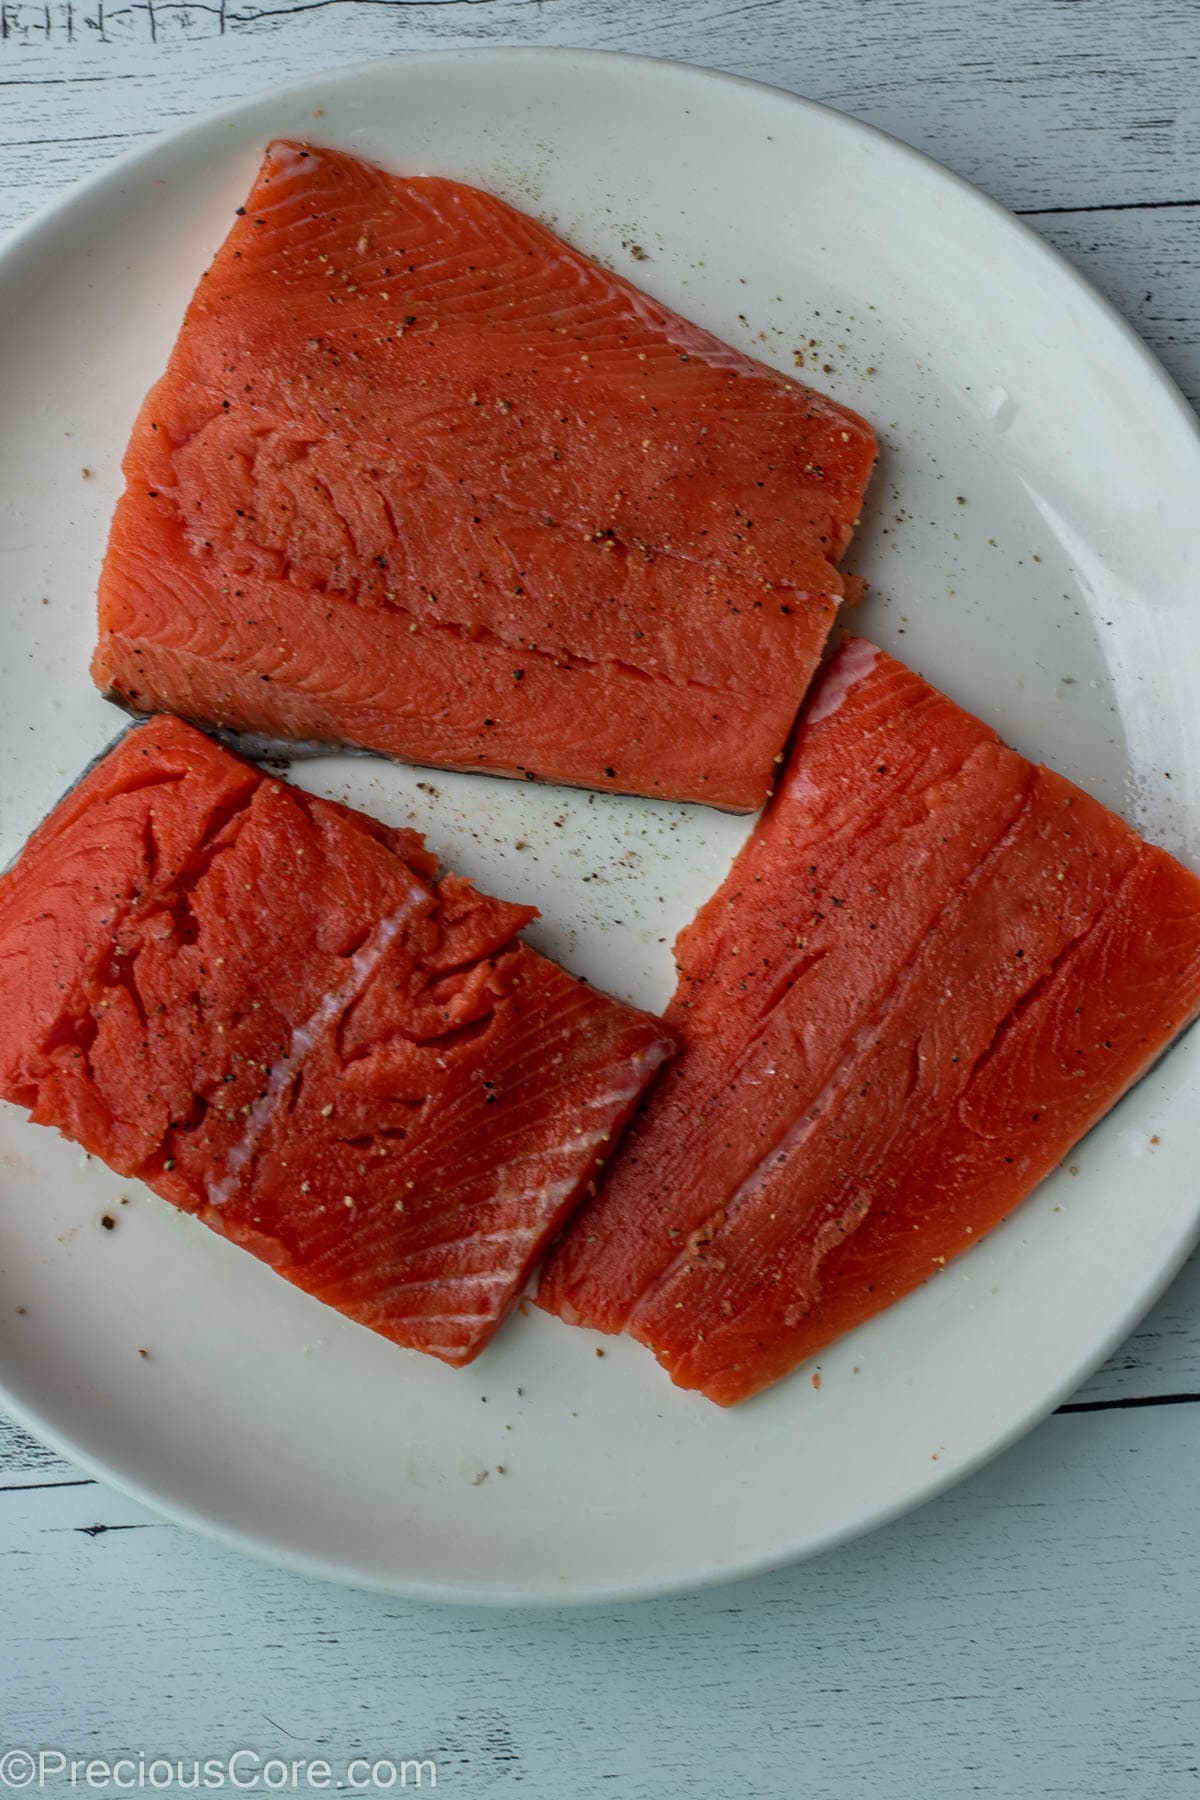 Salmon fillets seasoned with salt and pepper.